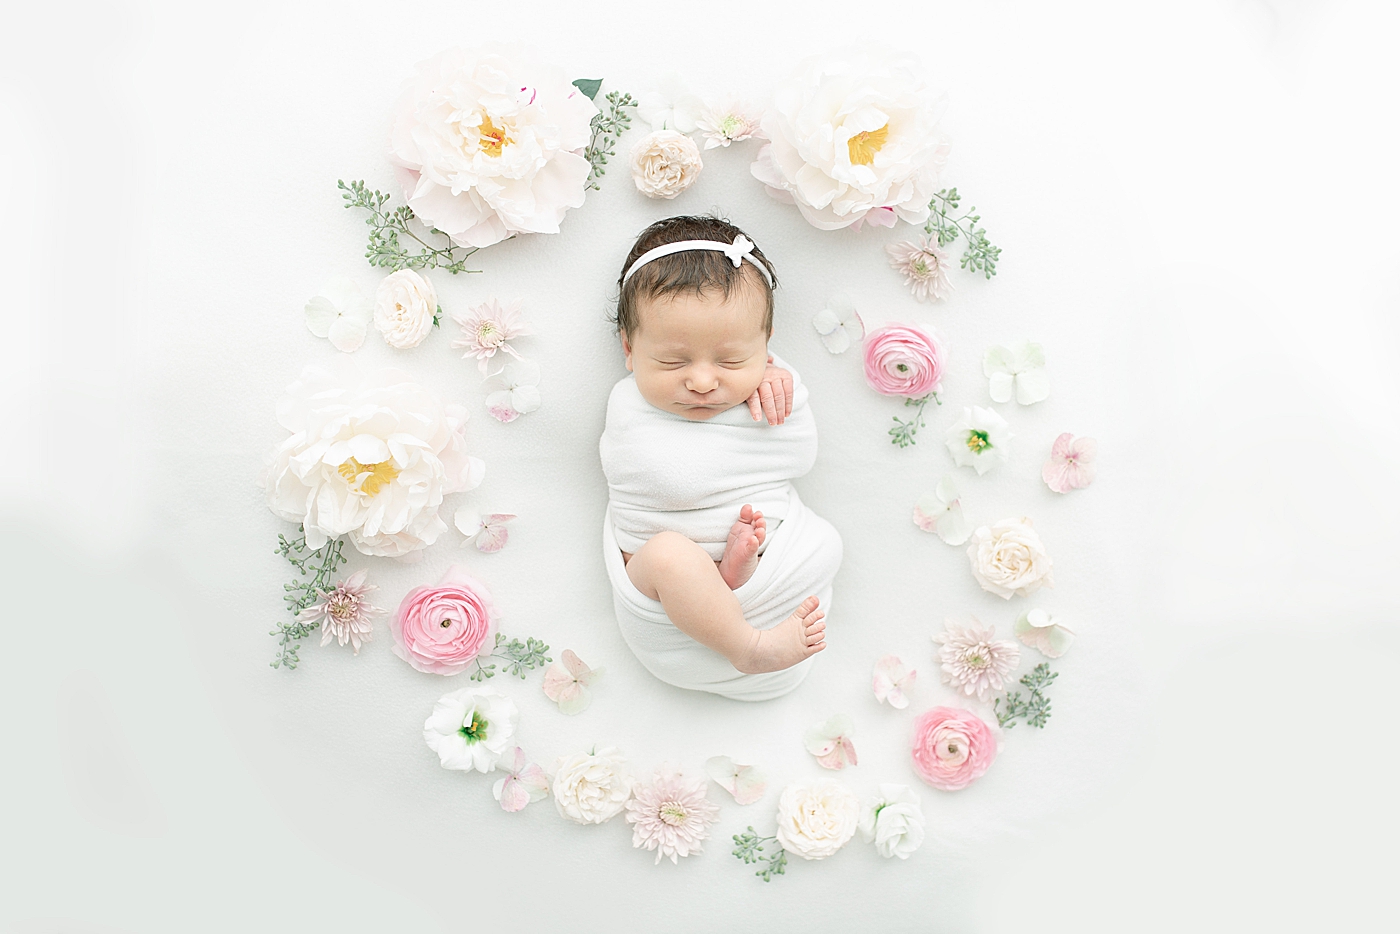 Newborn baby girl surrounded by flowers | Photo by Little Sunshine Photography